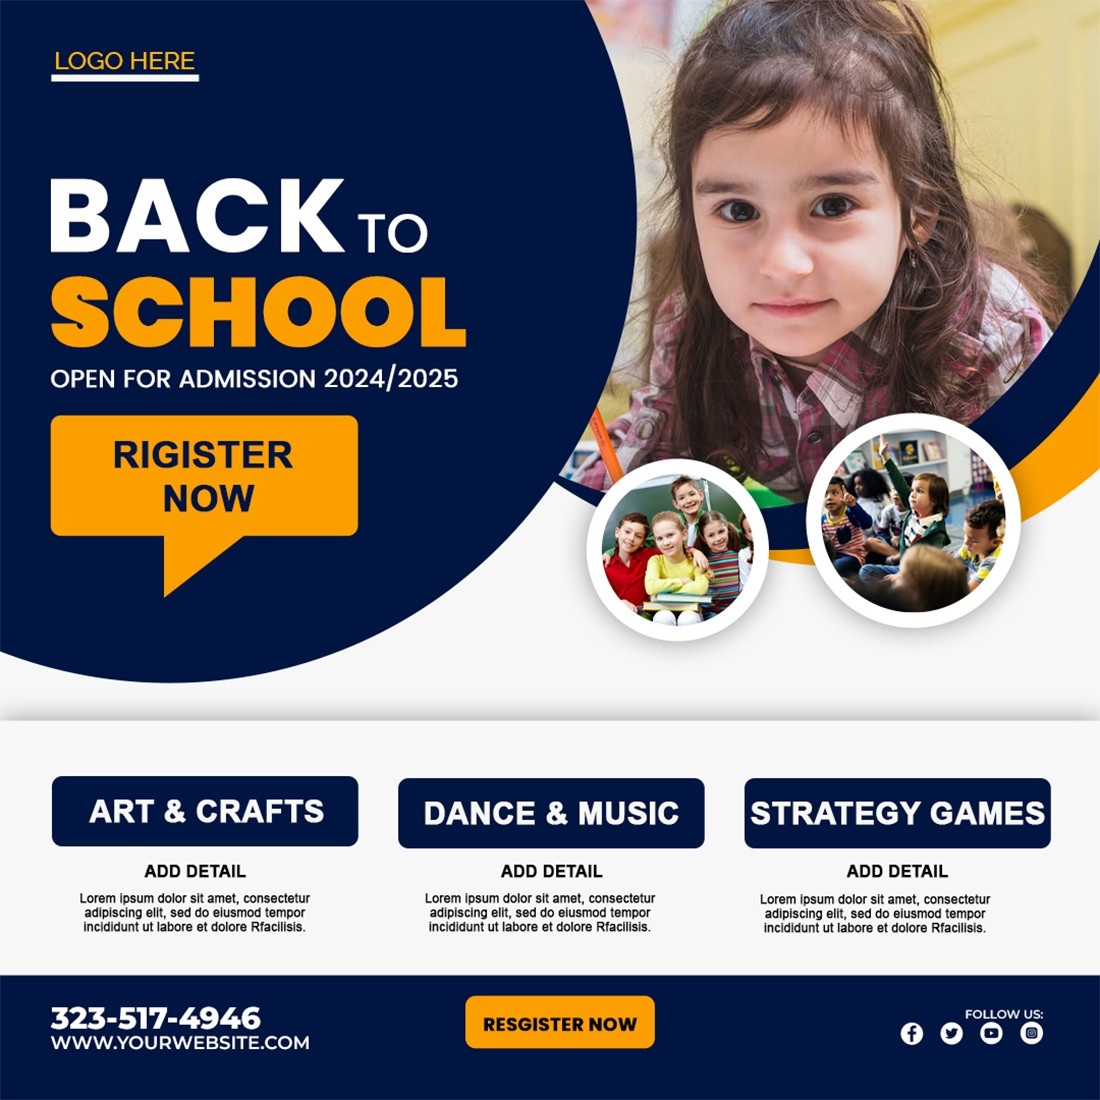 Back to school/ School Admission/ Kids Education social media Instagram/Facebook post template for your business cover image.